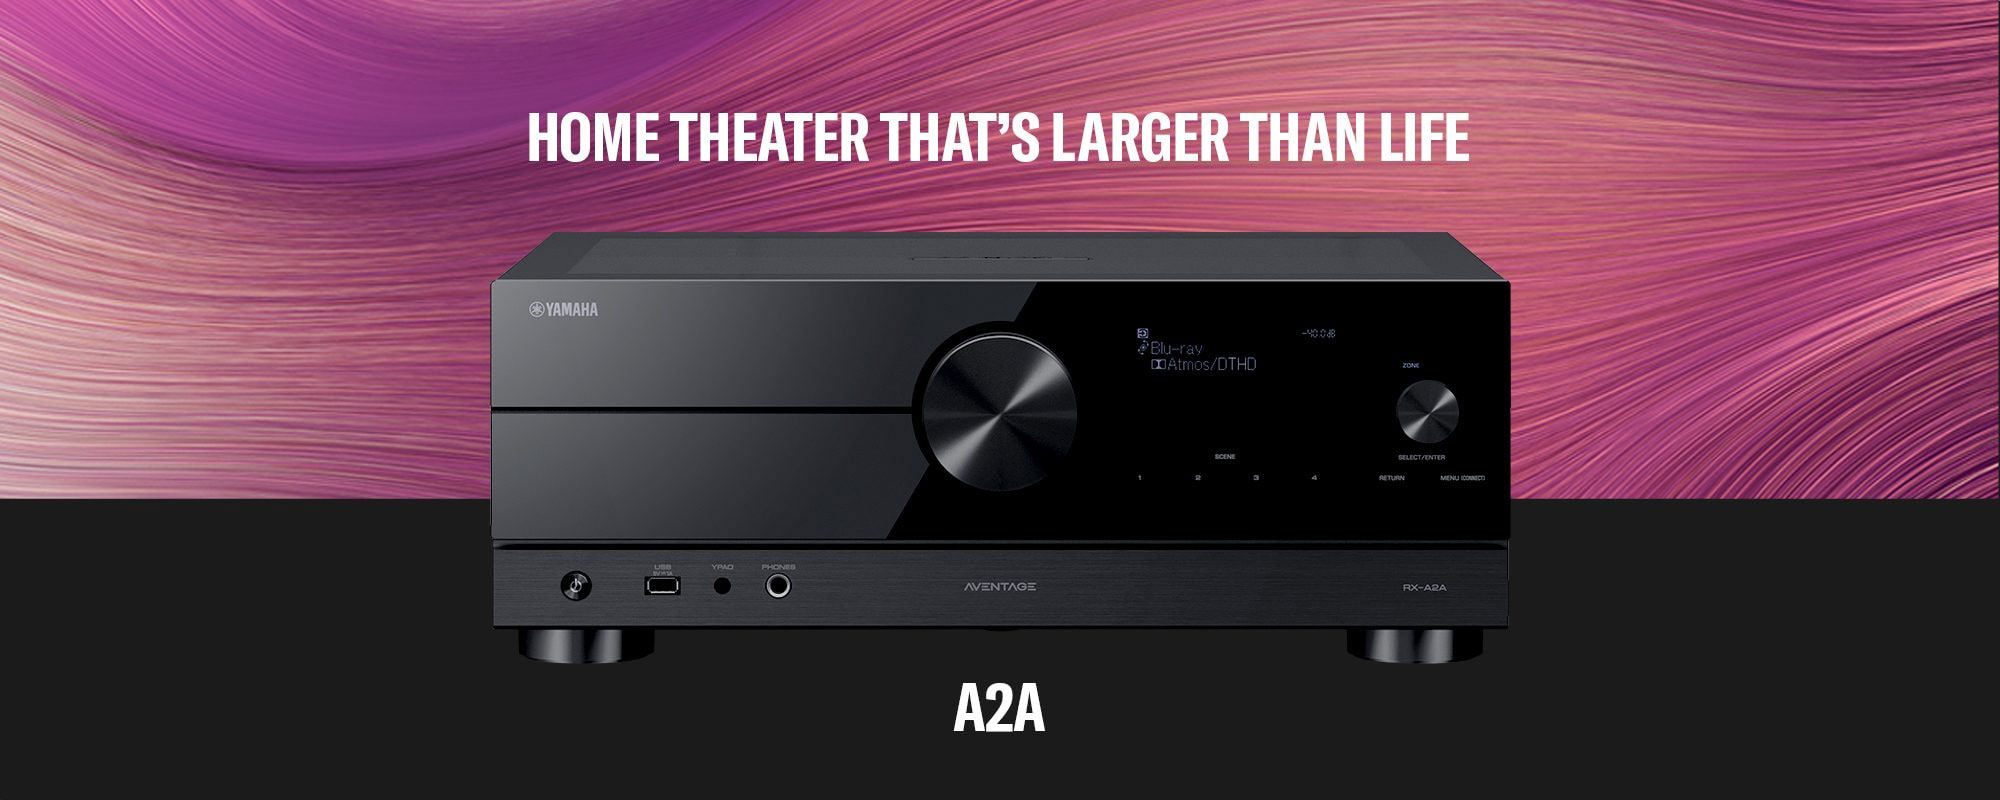 Yamaha RX-A2A A2A AVENTAGE Receiver Amp HOME THEATER THATS LARGER THAN LIFE